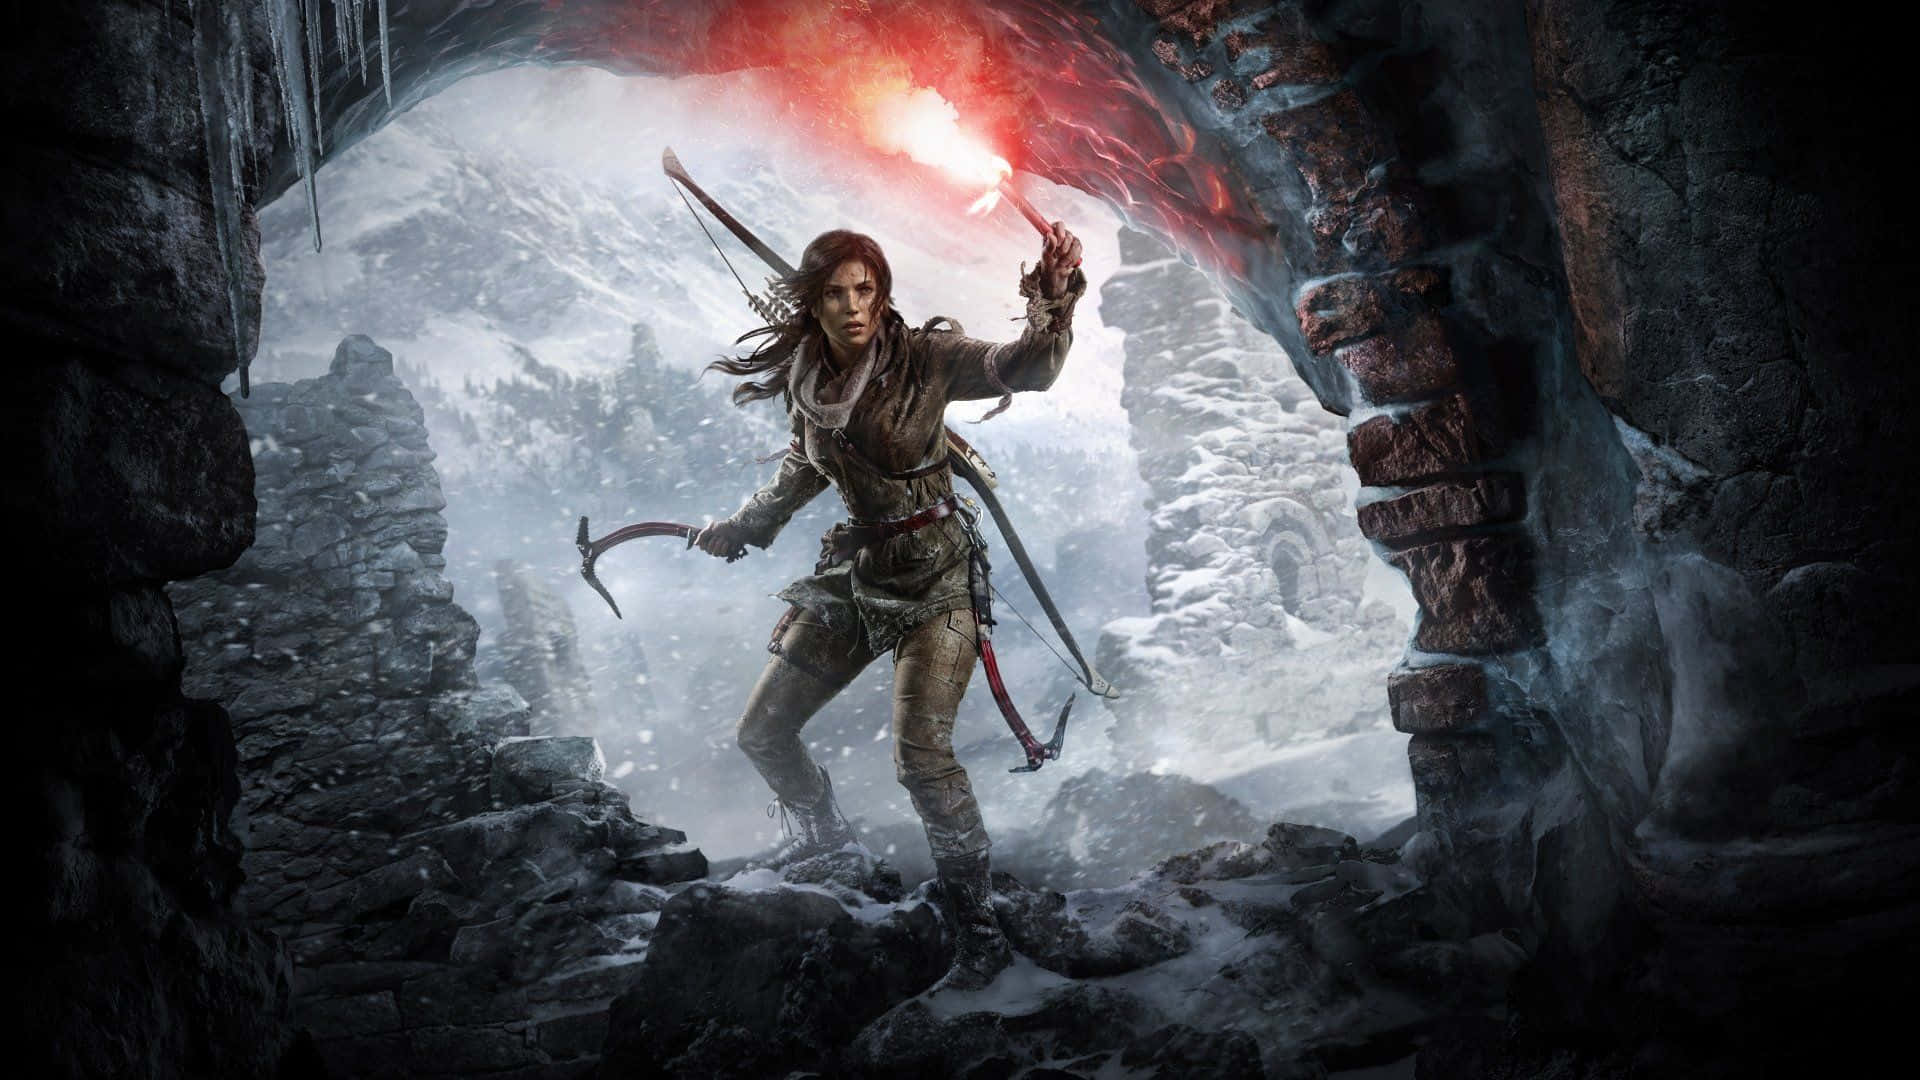 Explore the lost city of Kitezh and unlock the secrets of the past with Rise of the Tomb Raider Wallpaper